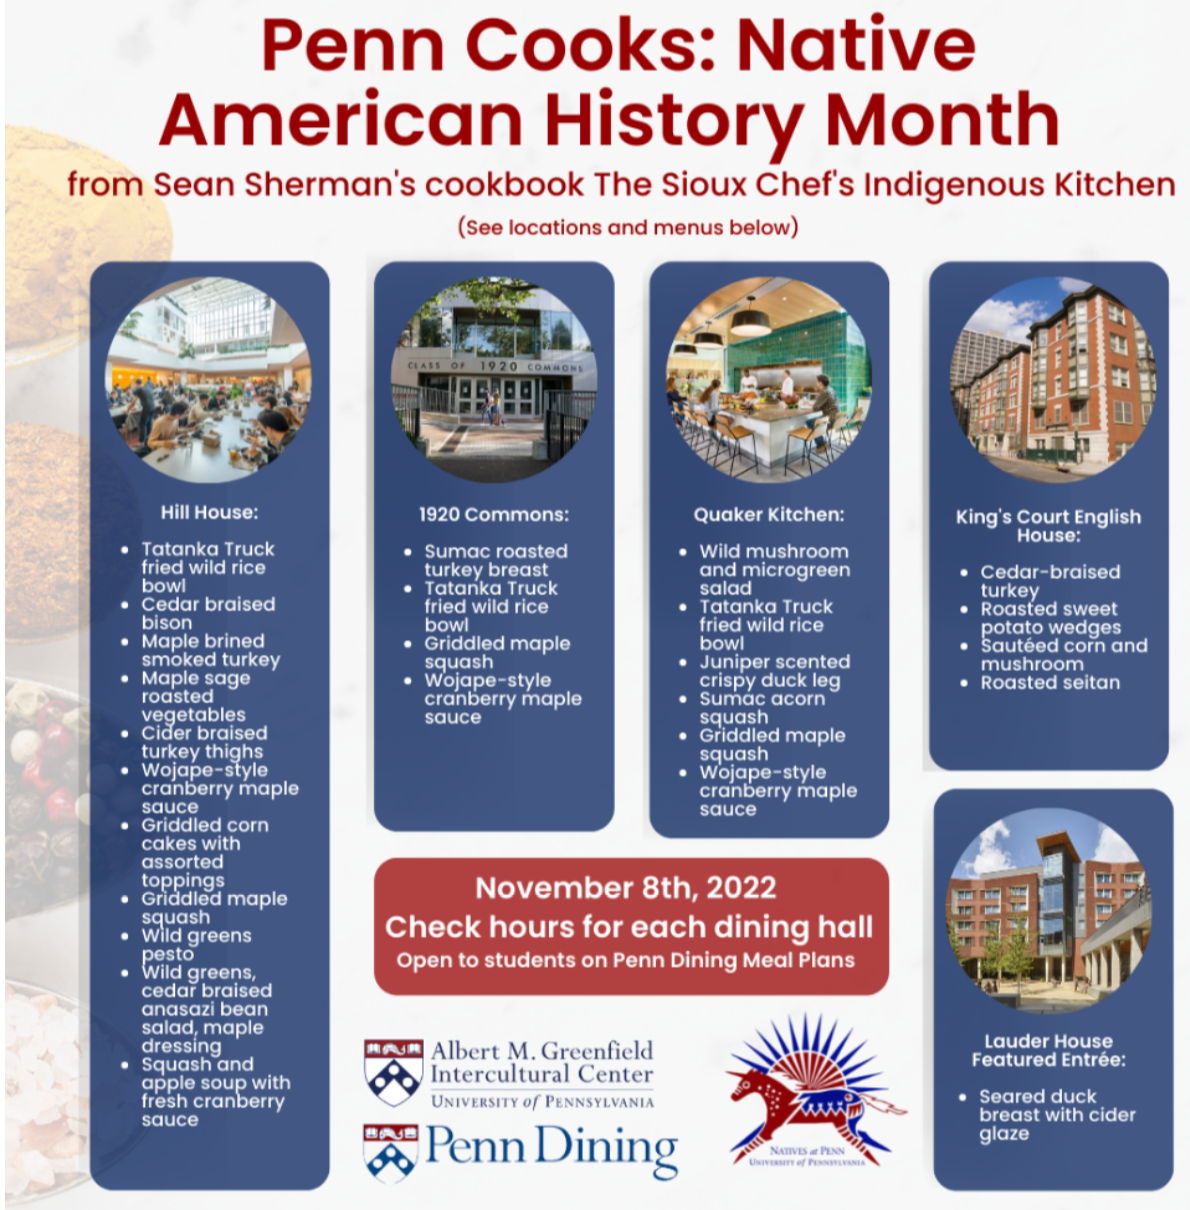 Penn Cooks Native American History Month